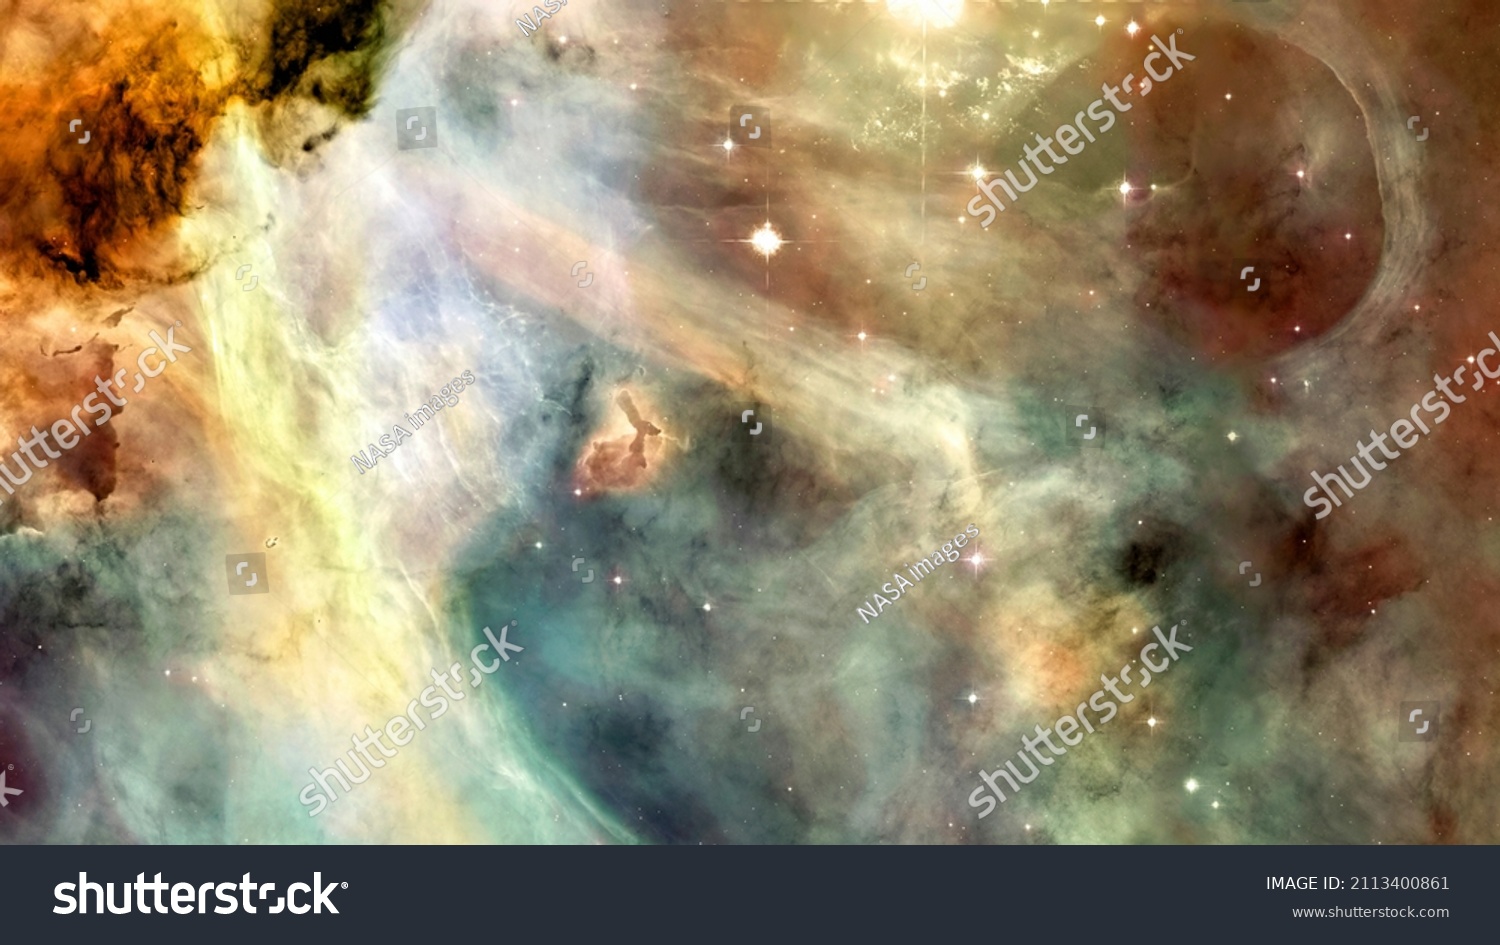 Awesome galaxy somewhere in outer space. Cosmic wallpaper. Elements of this image furnished by NASA. #2113400861